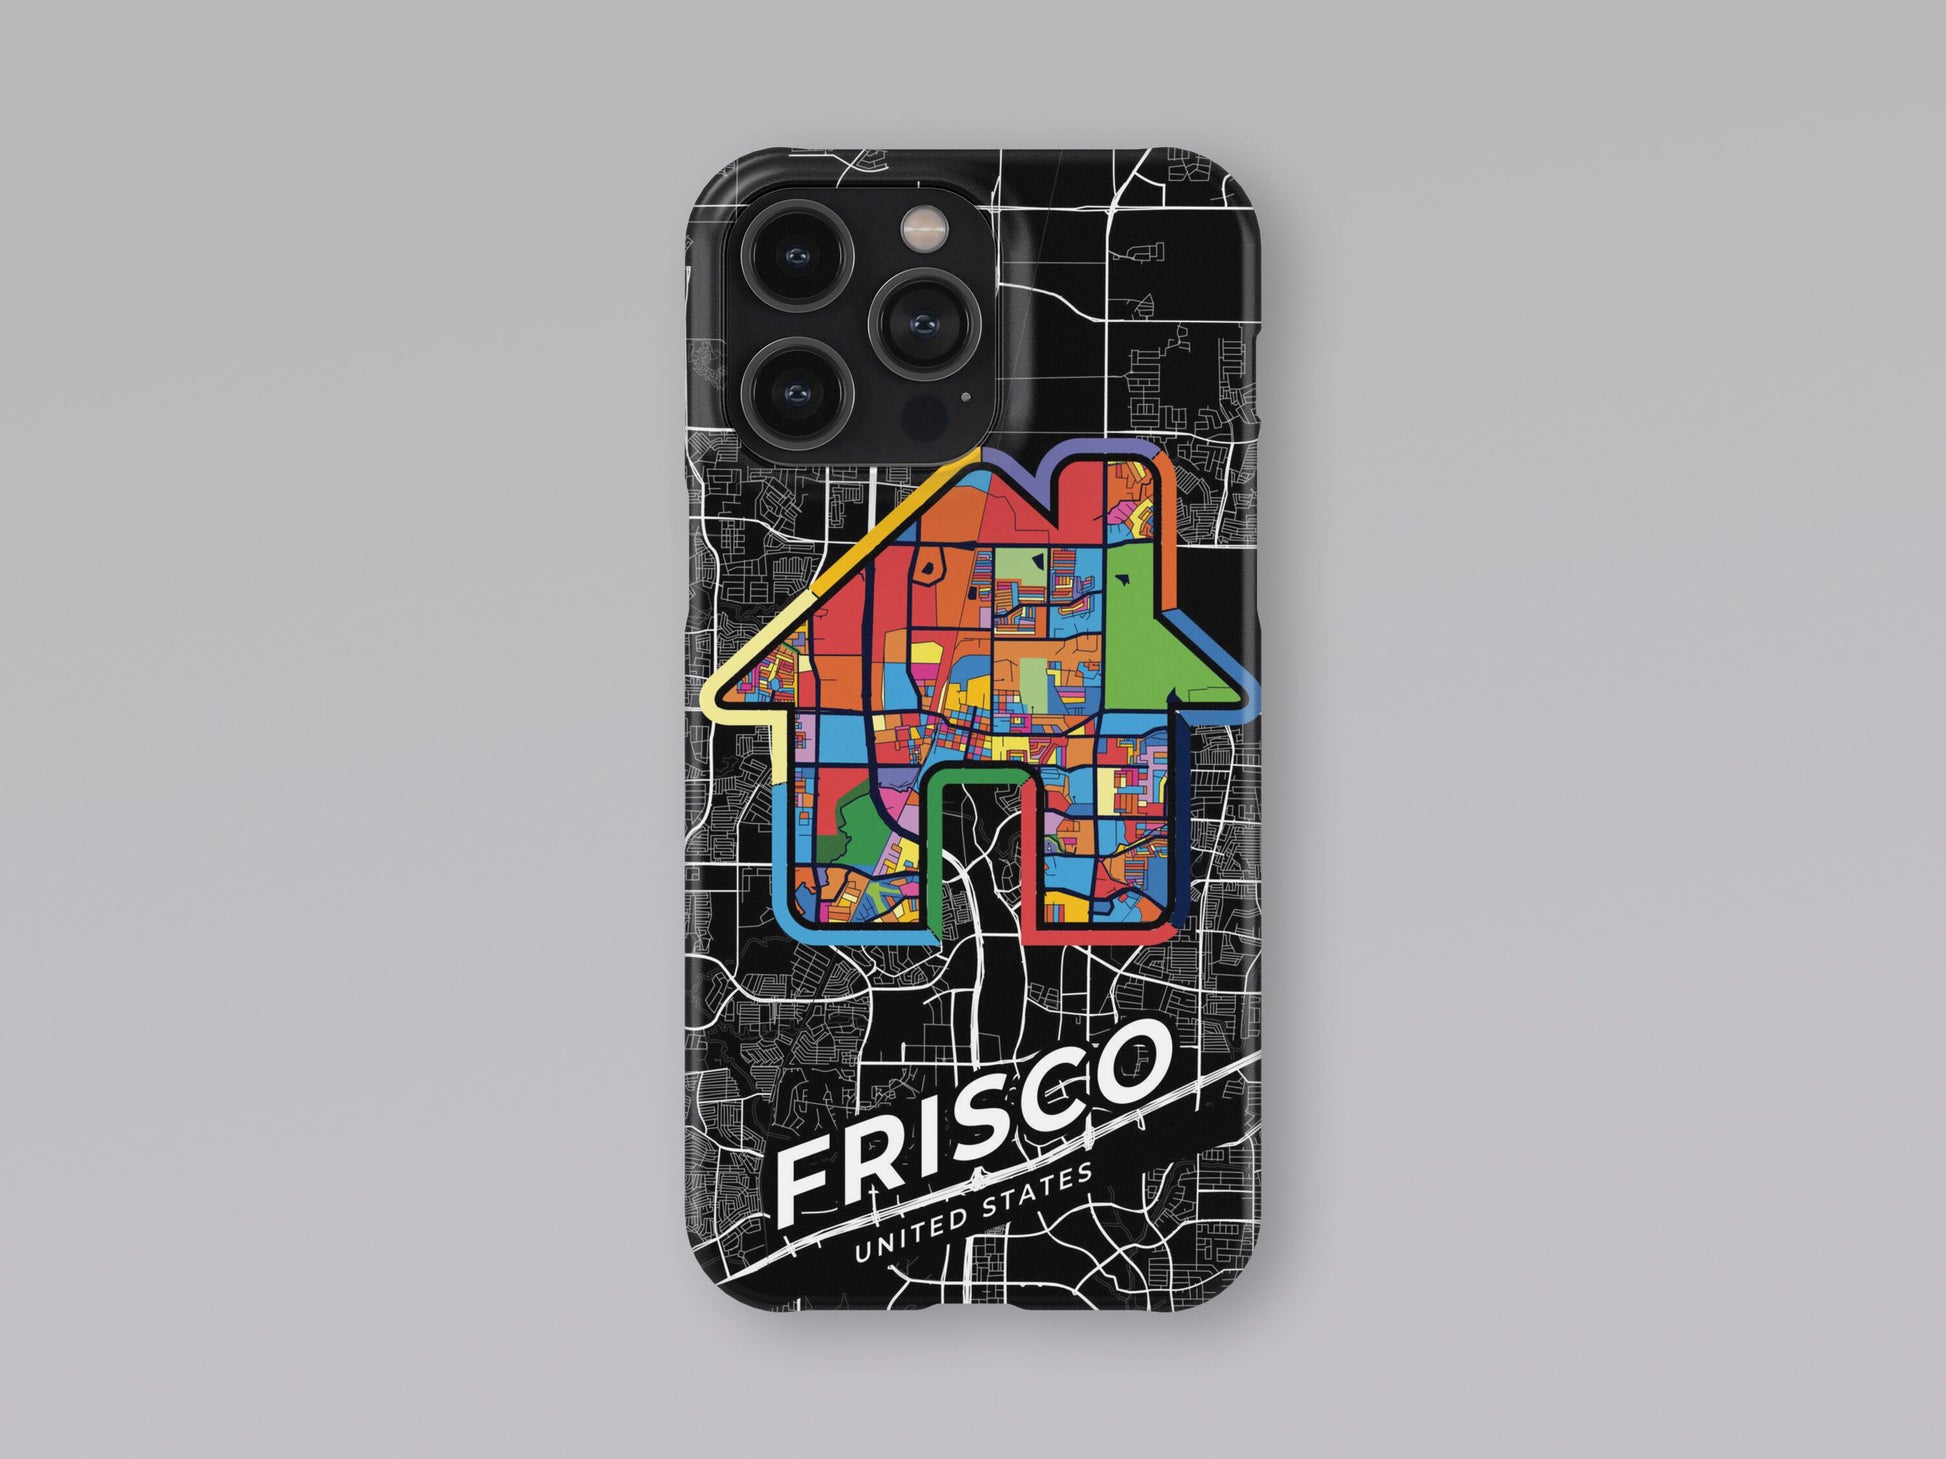 Frisco Texas slim phone case with colorful icon. Birthday, wedding or housewarming gift. Couple match cases. 3